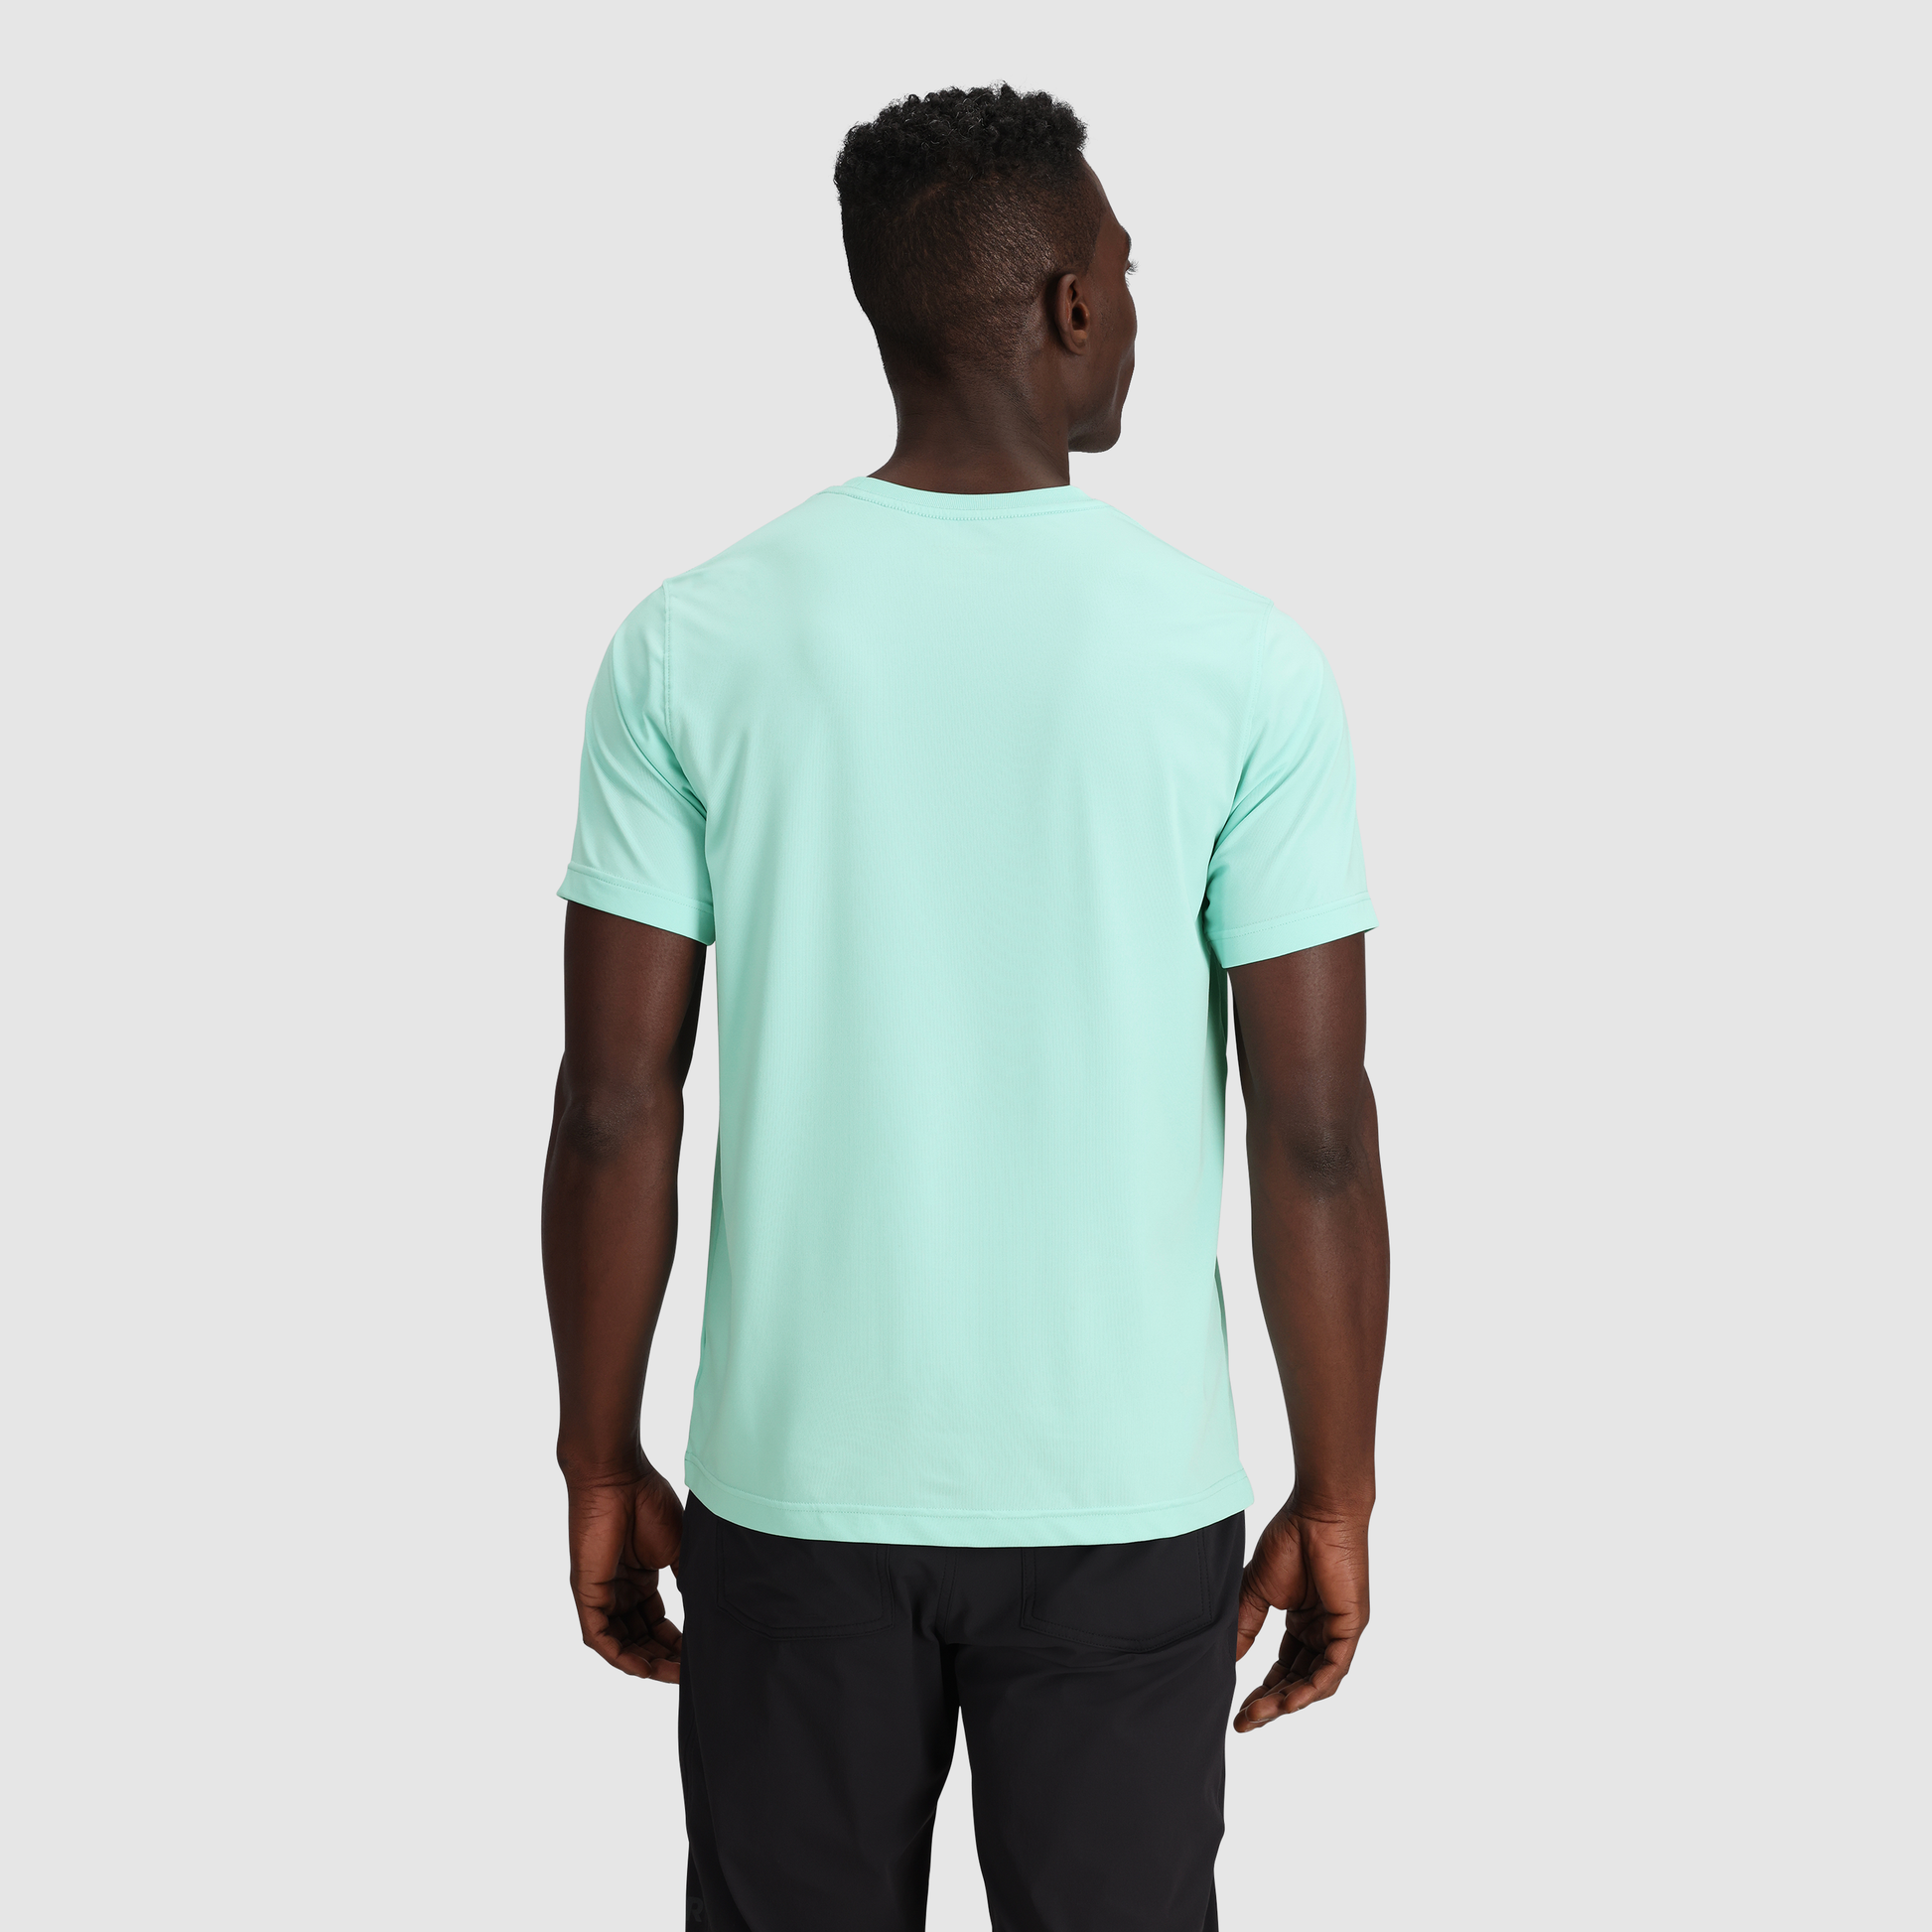 Men's Breathable Crew Neck Essential Fitness T-Shirt - Neon Green